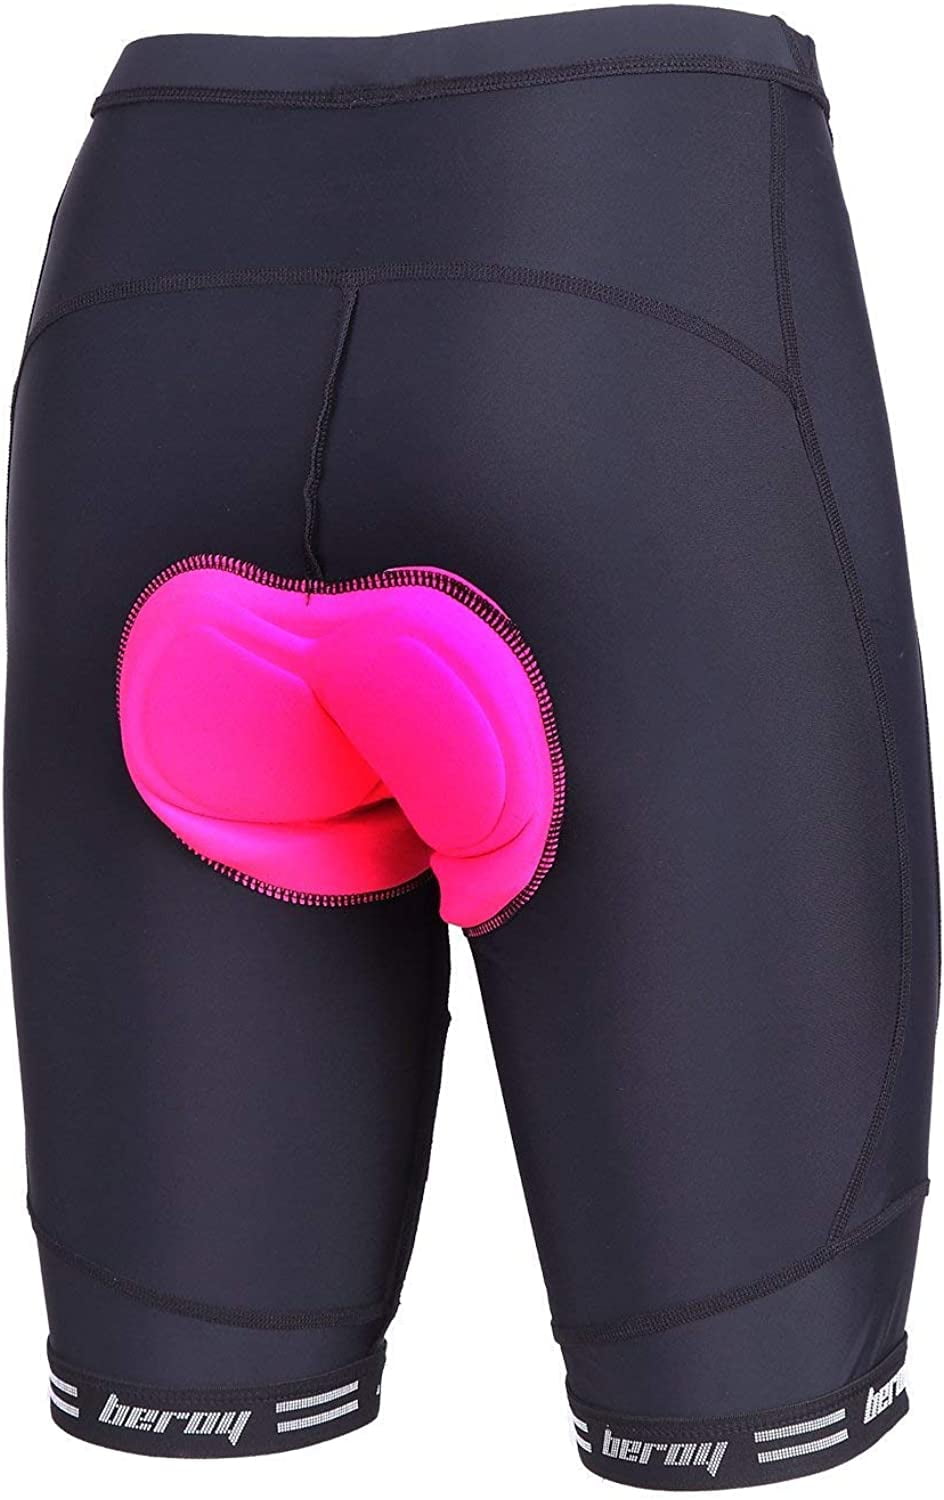 3D Gel Padded Female Sporting Cycling Clothing Underwear Women Bicycle Shorts L 